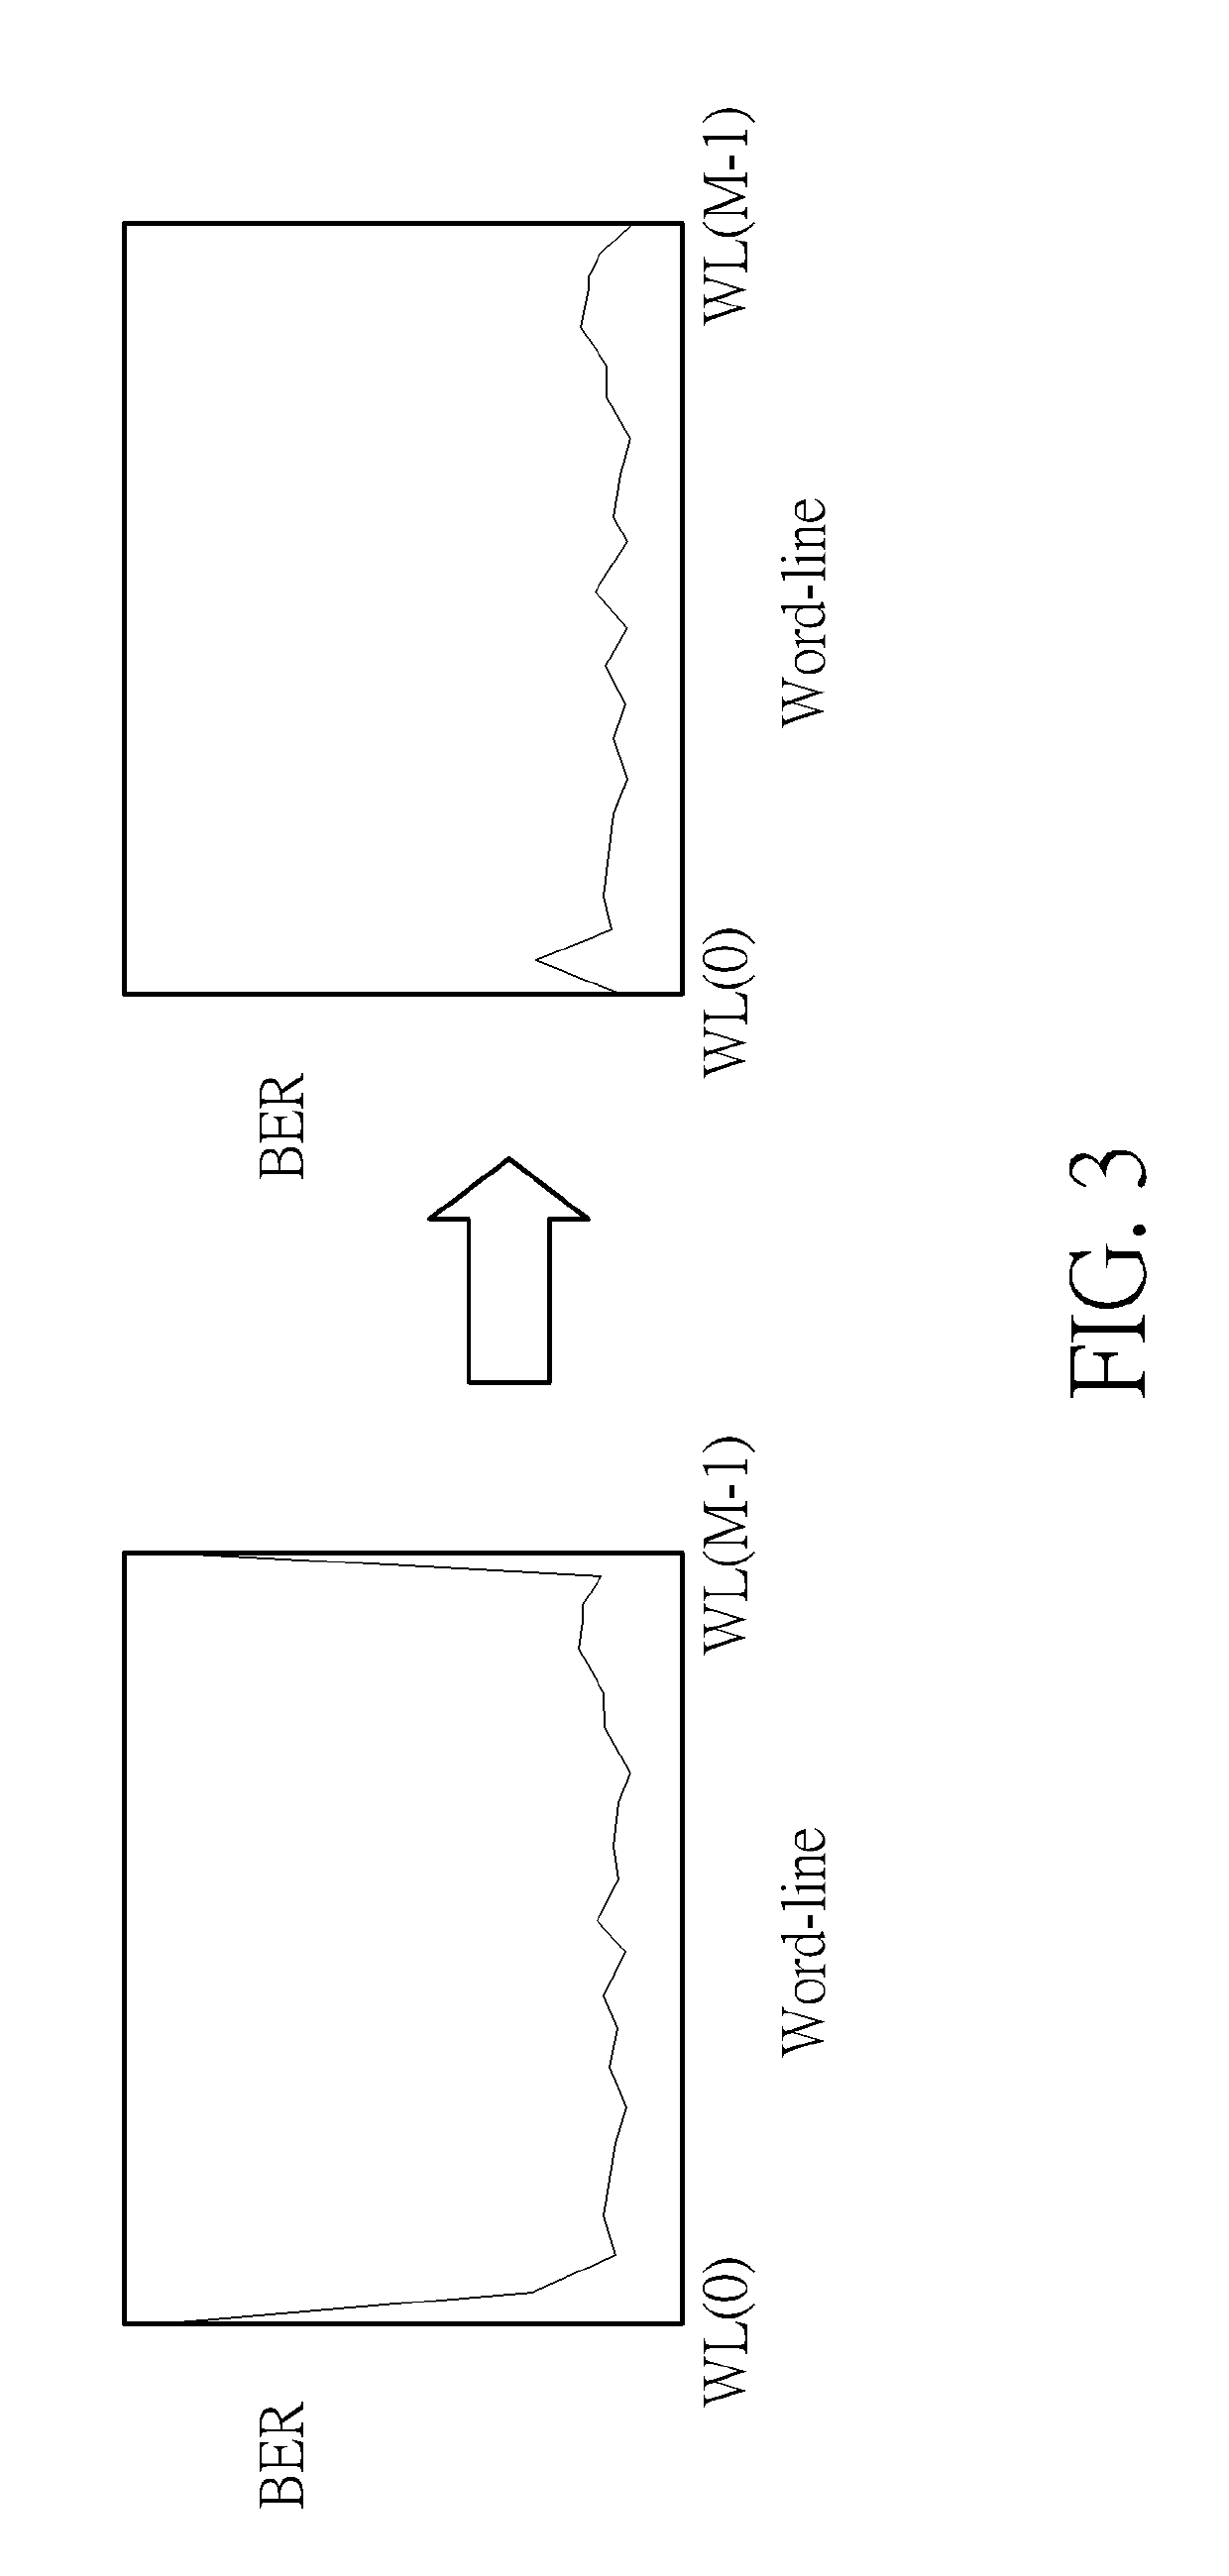 Method for controlling operations of data storage device, and associated data storage device and controller